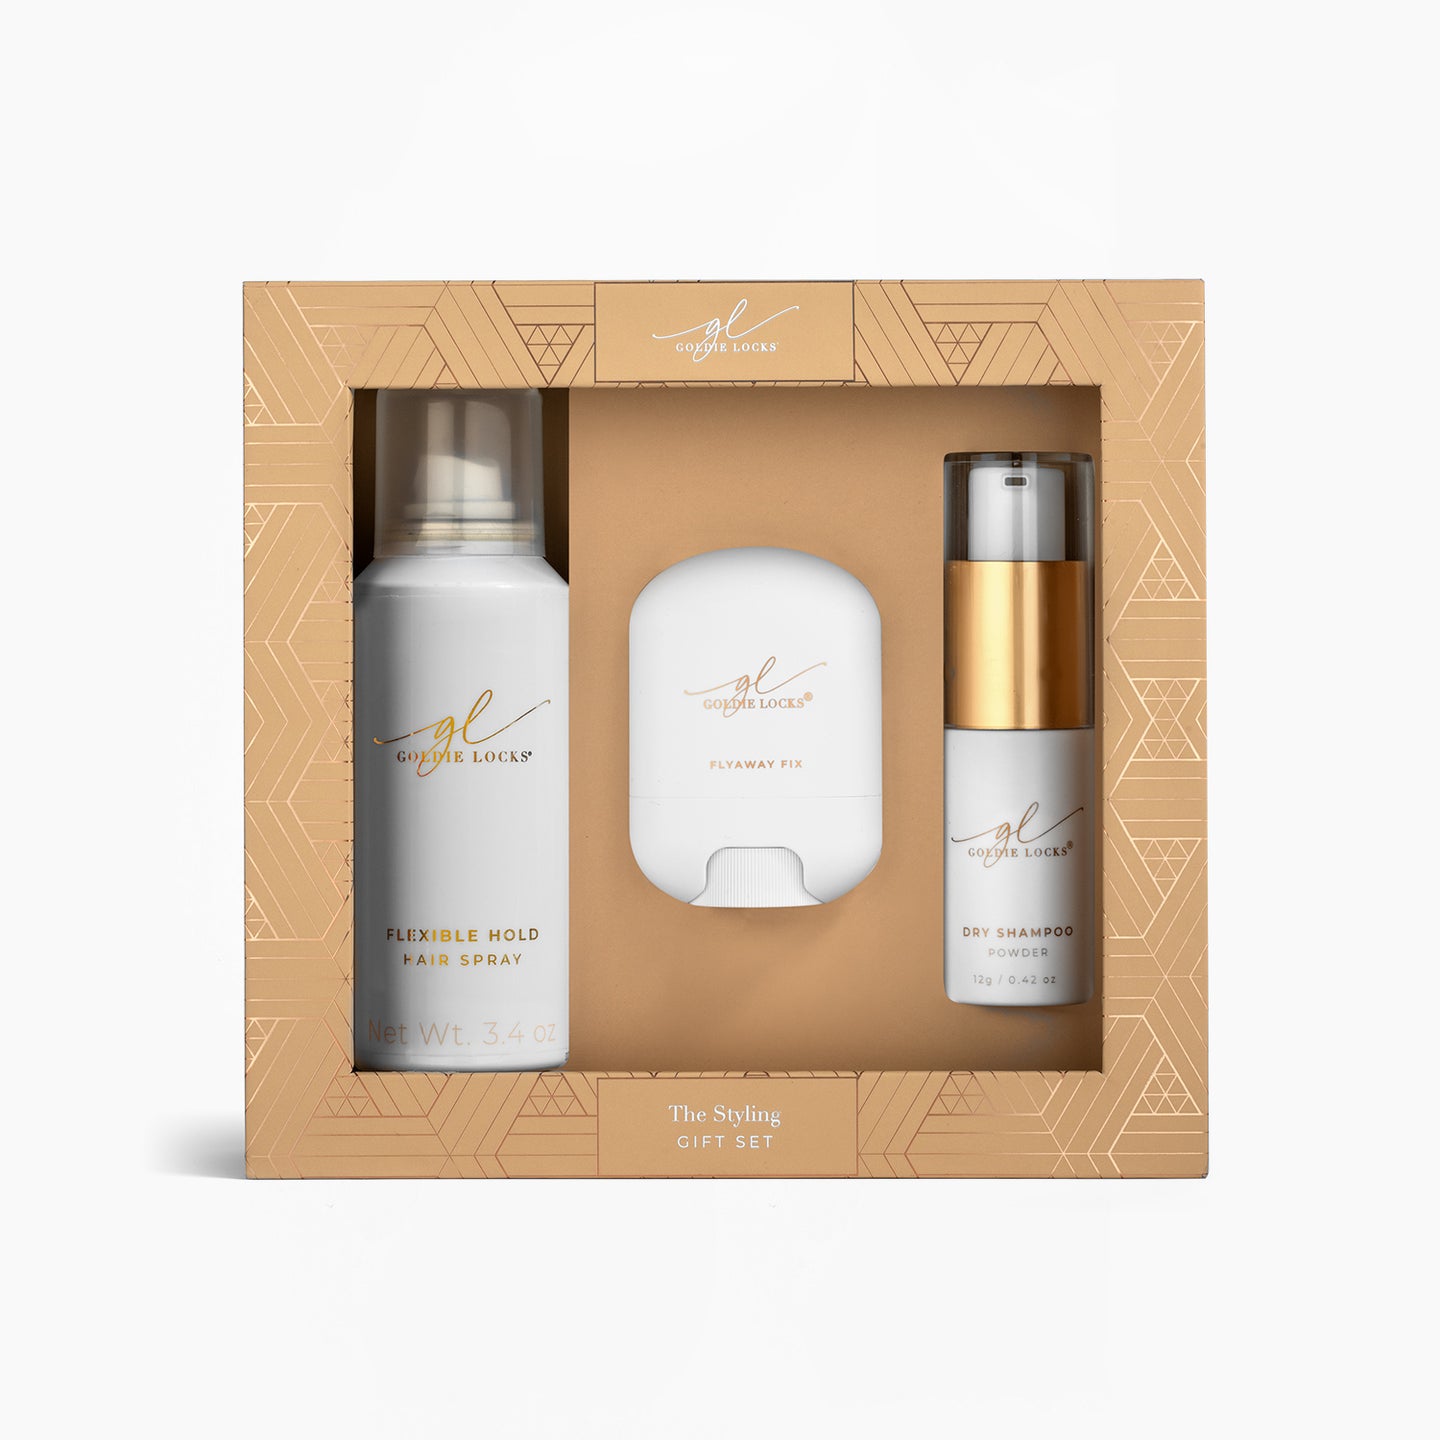 The Styling Gift Set